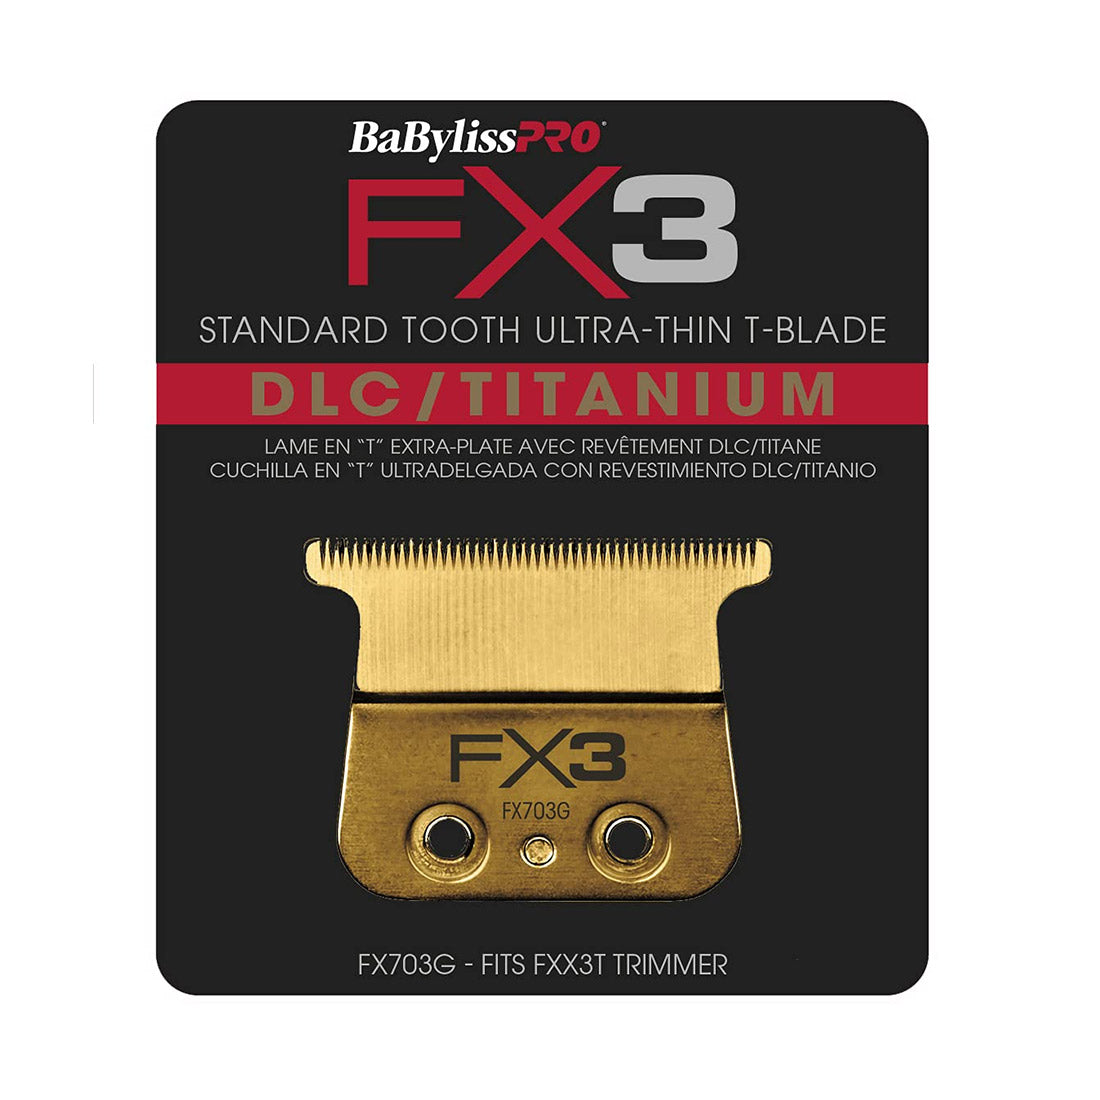 BaBylissPRO FX3 Standard Tooth Replacement Blade FX703G